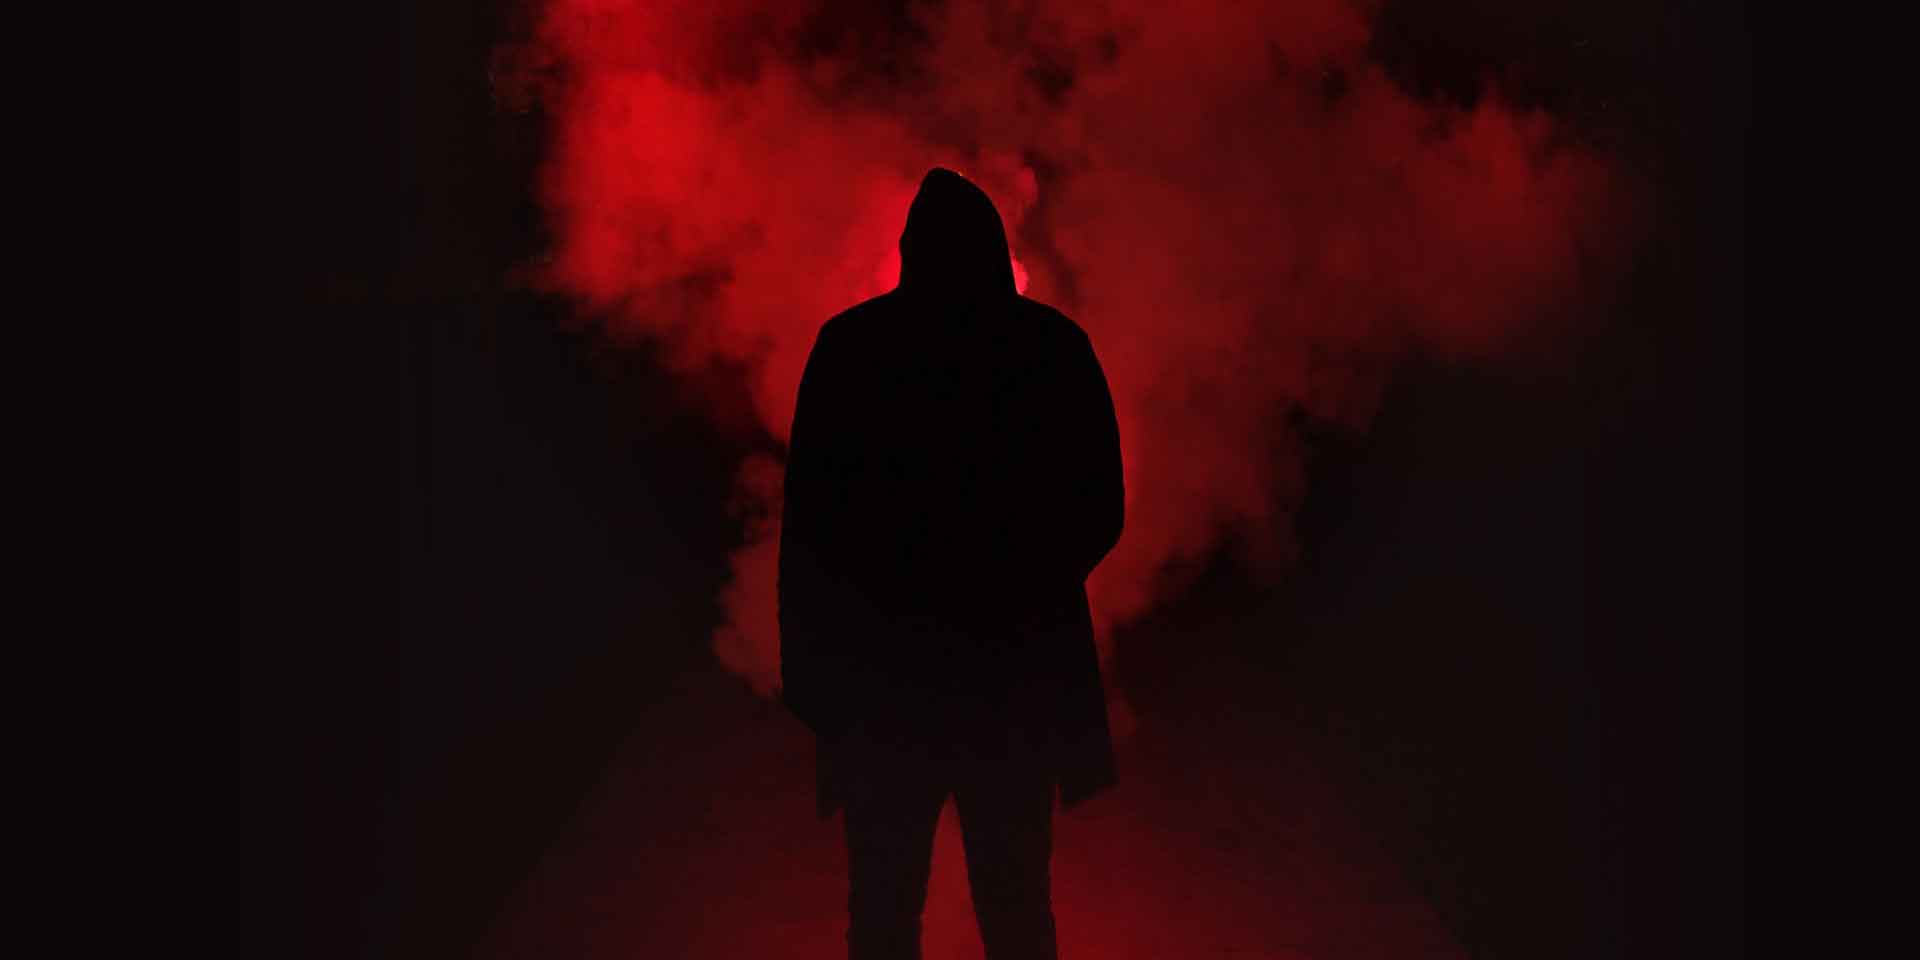 A silhouette of a person stands shrouded in mystery amidst a deep red haze, evoking a sense of metaphysical intrigue and suspense.